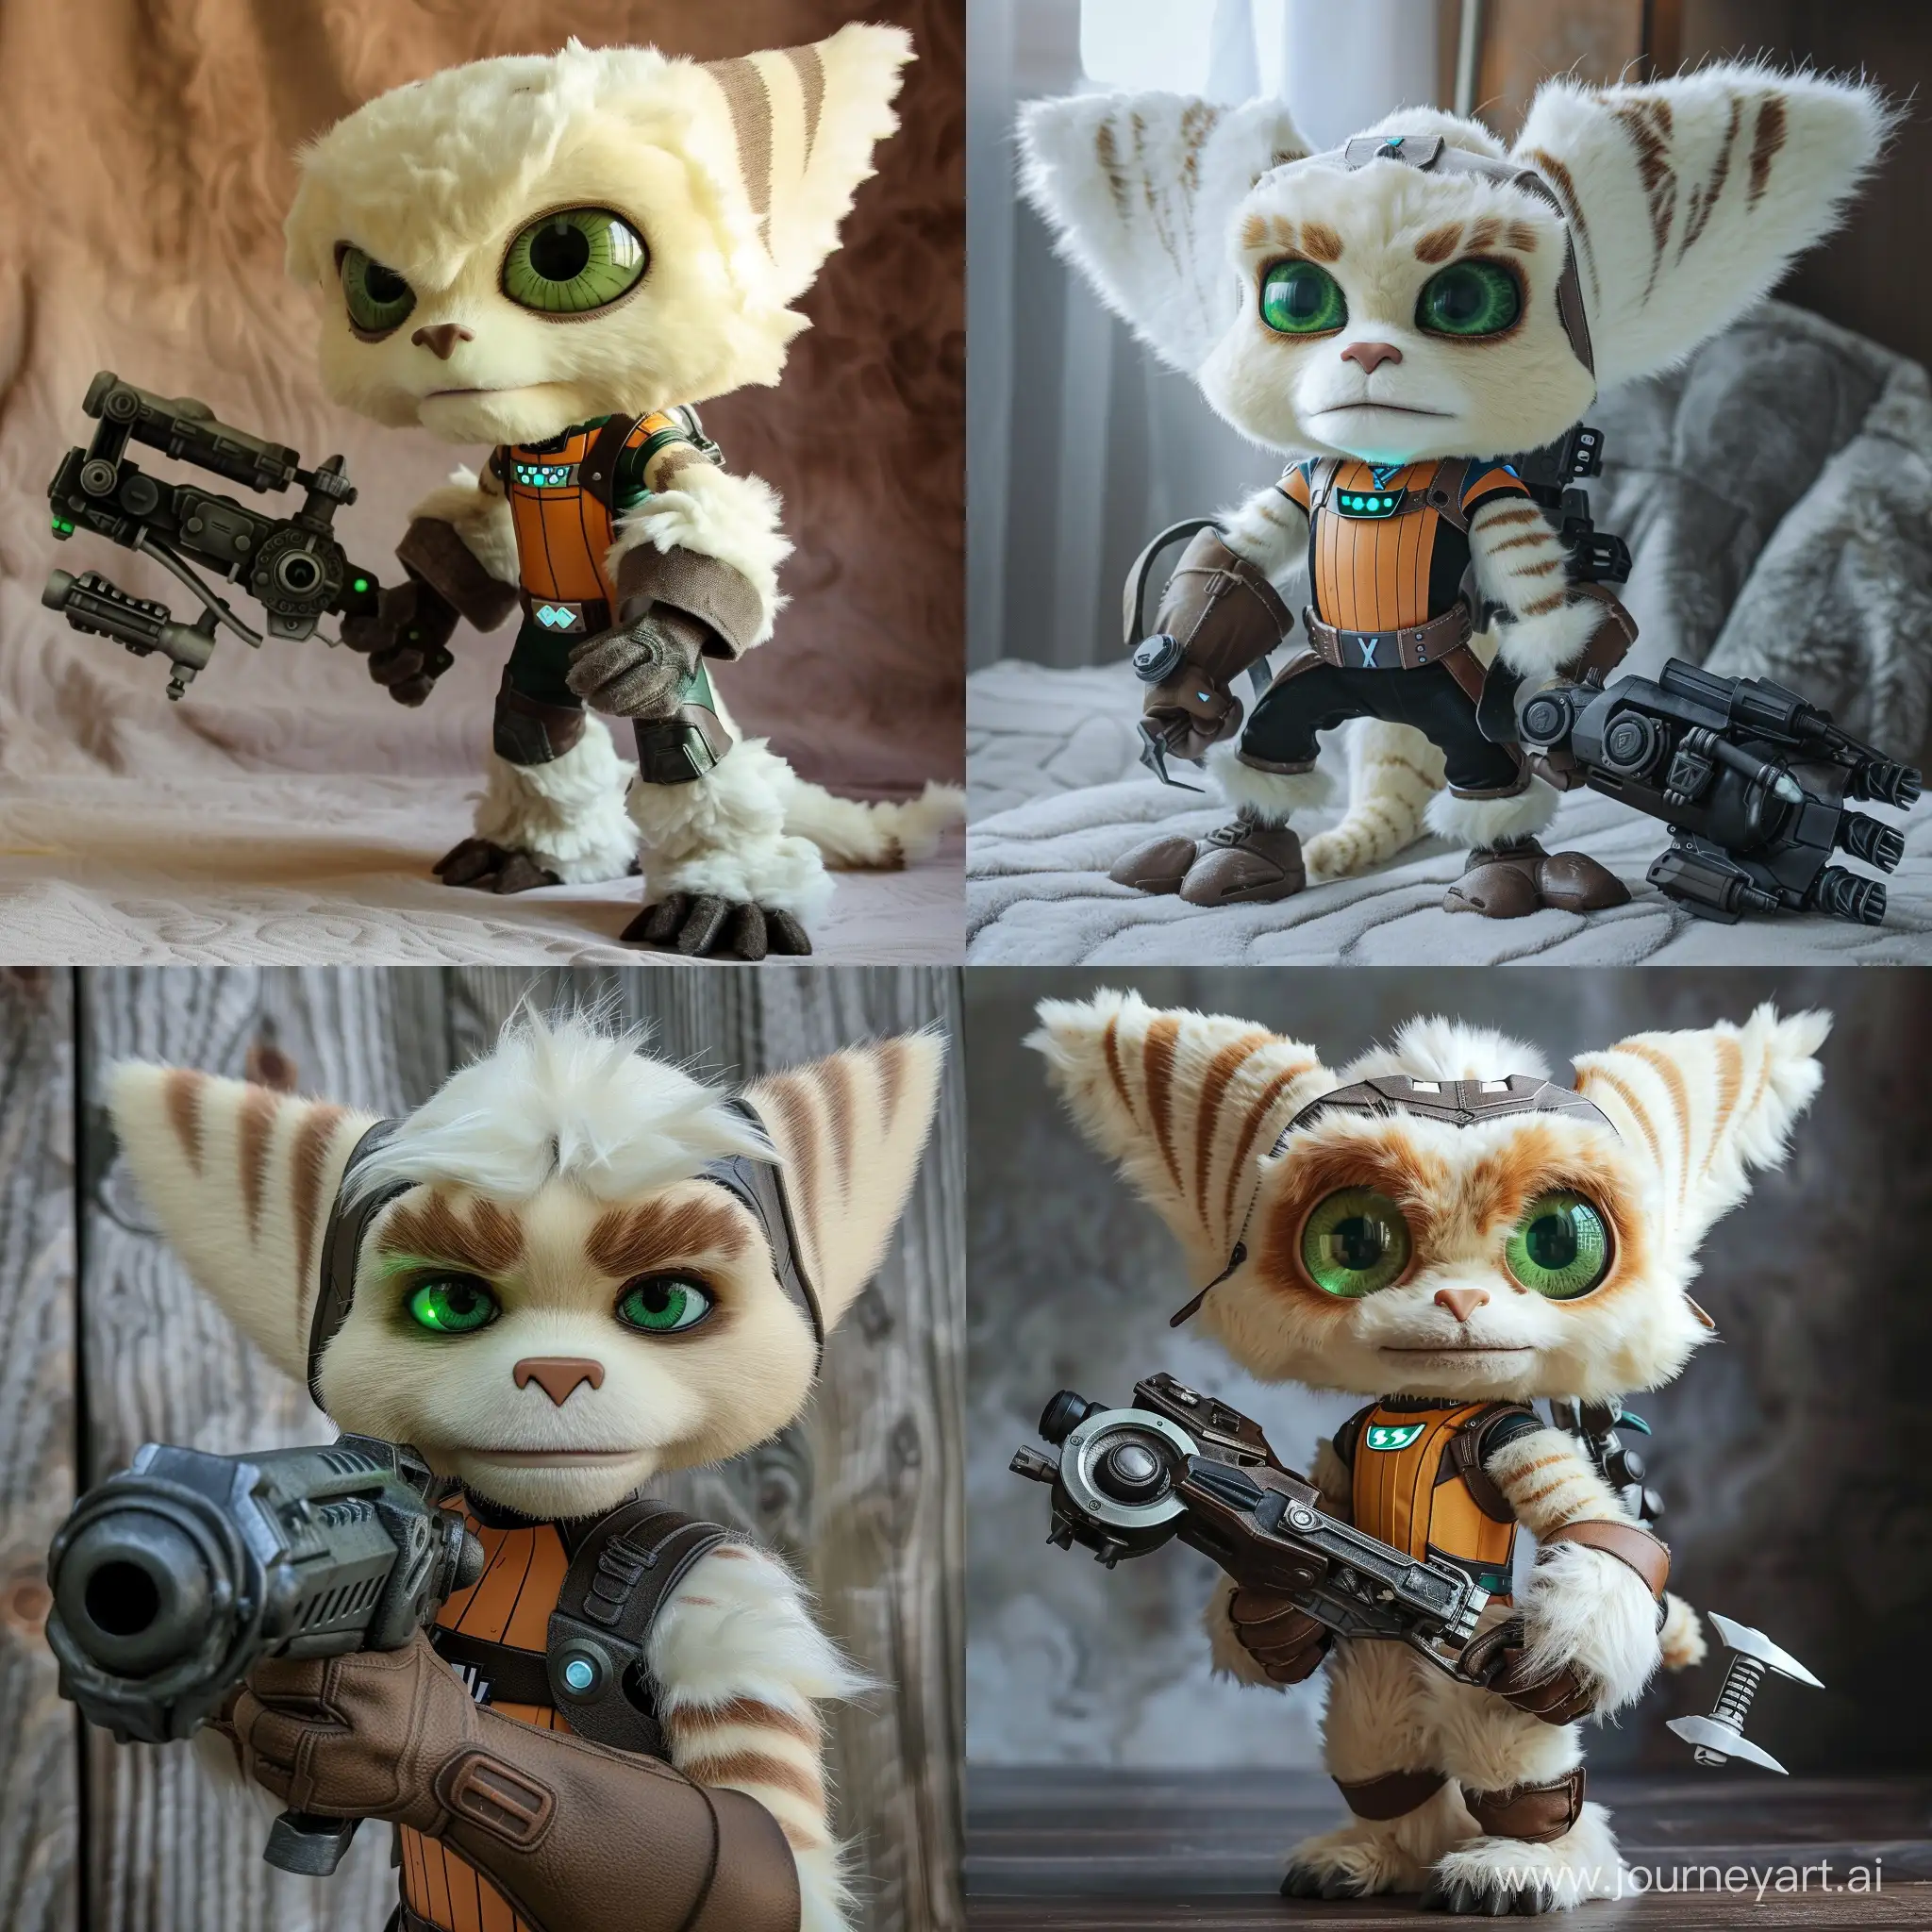 Adventurous-CreamColored-Lombax-with-Green-Eyes-Wielding-Ratchet-and-Clank-Weapon